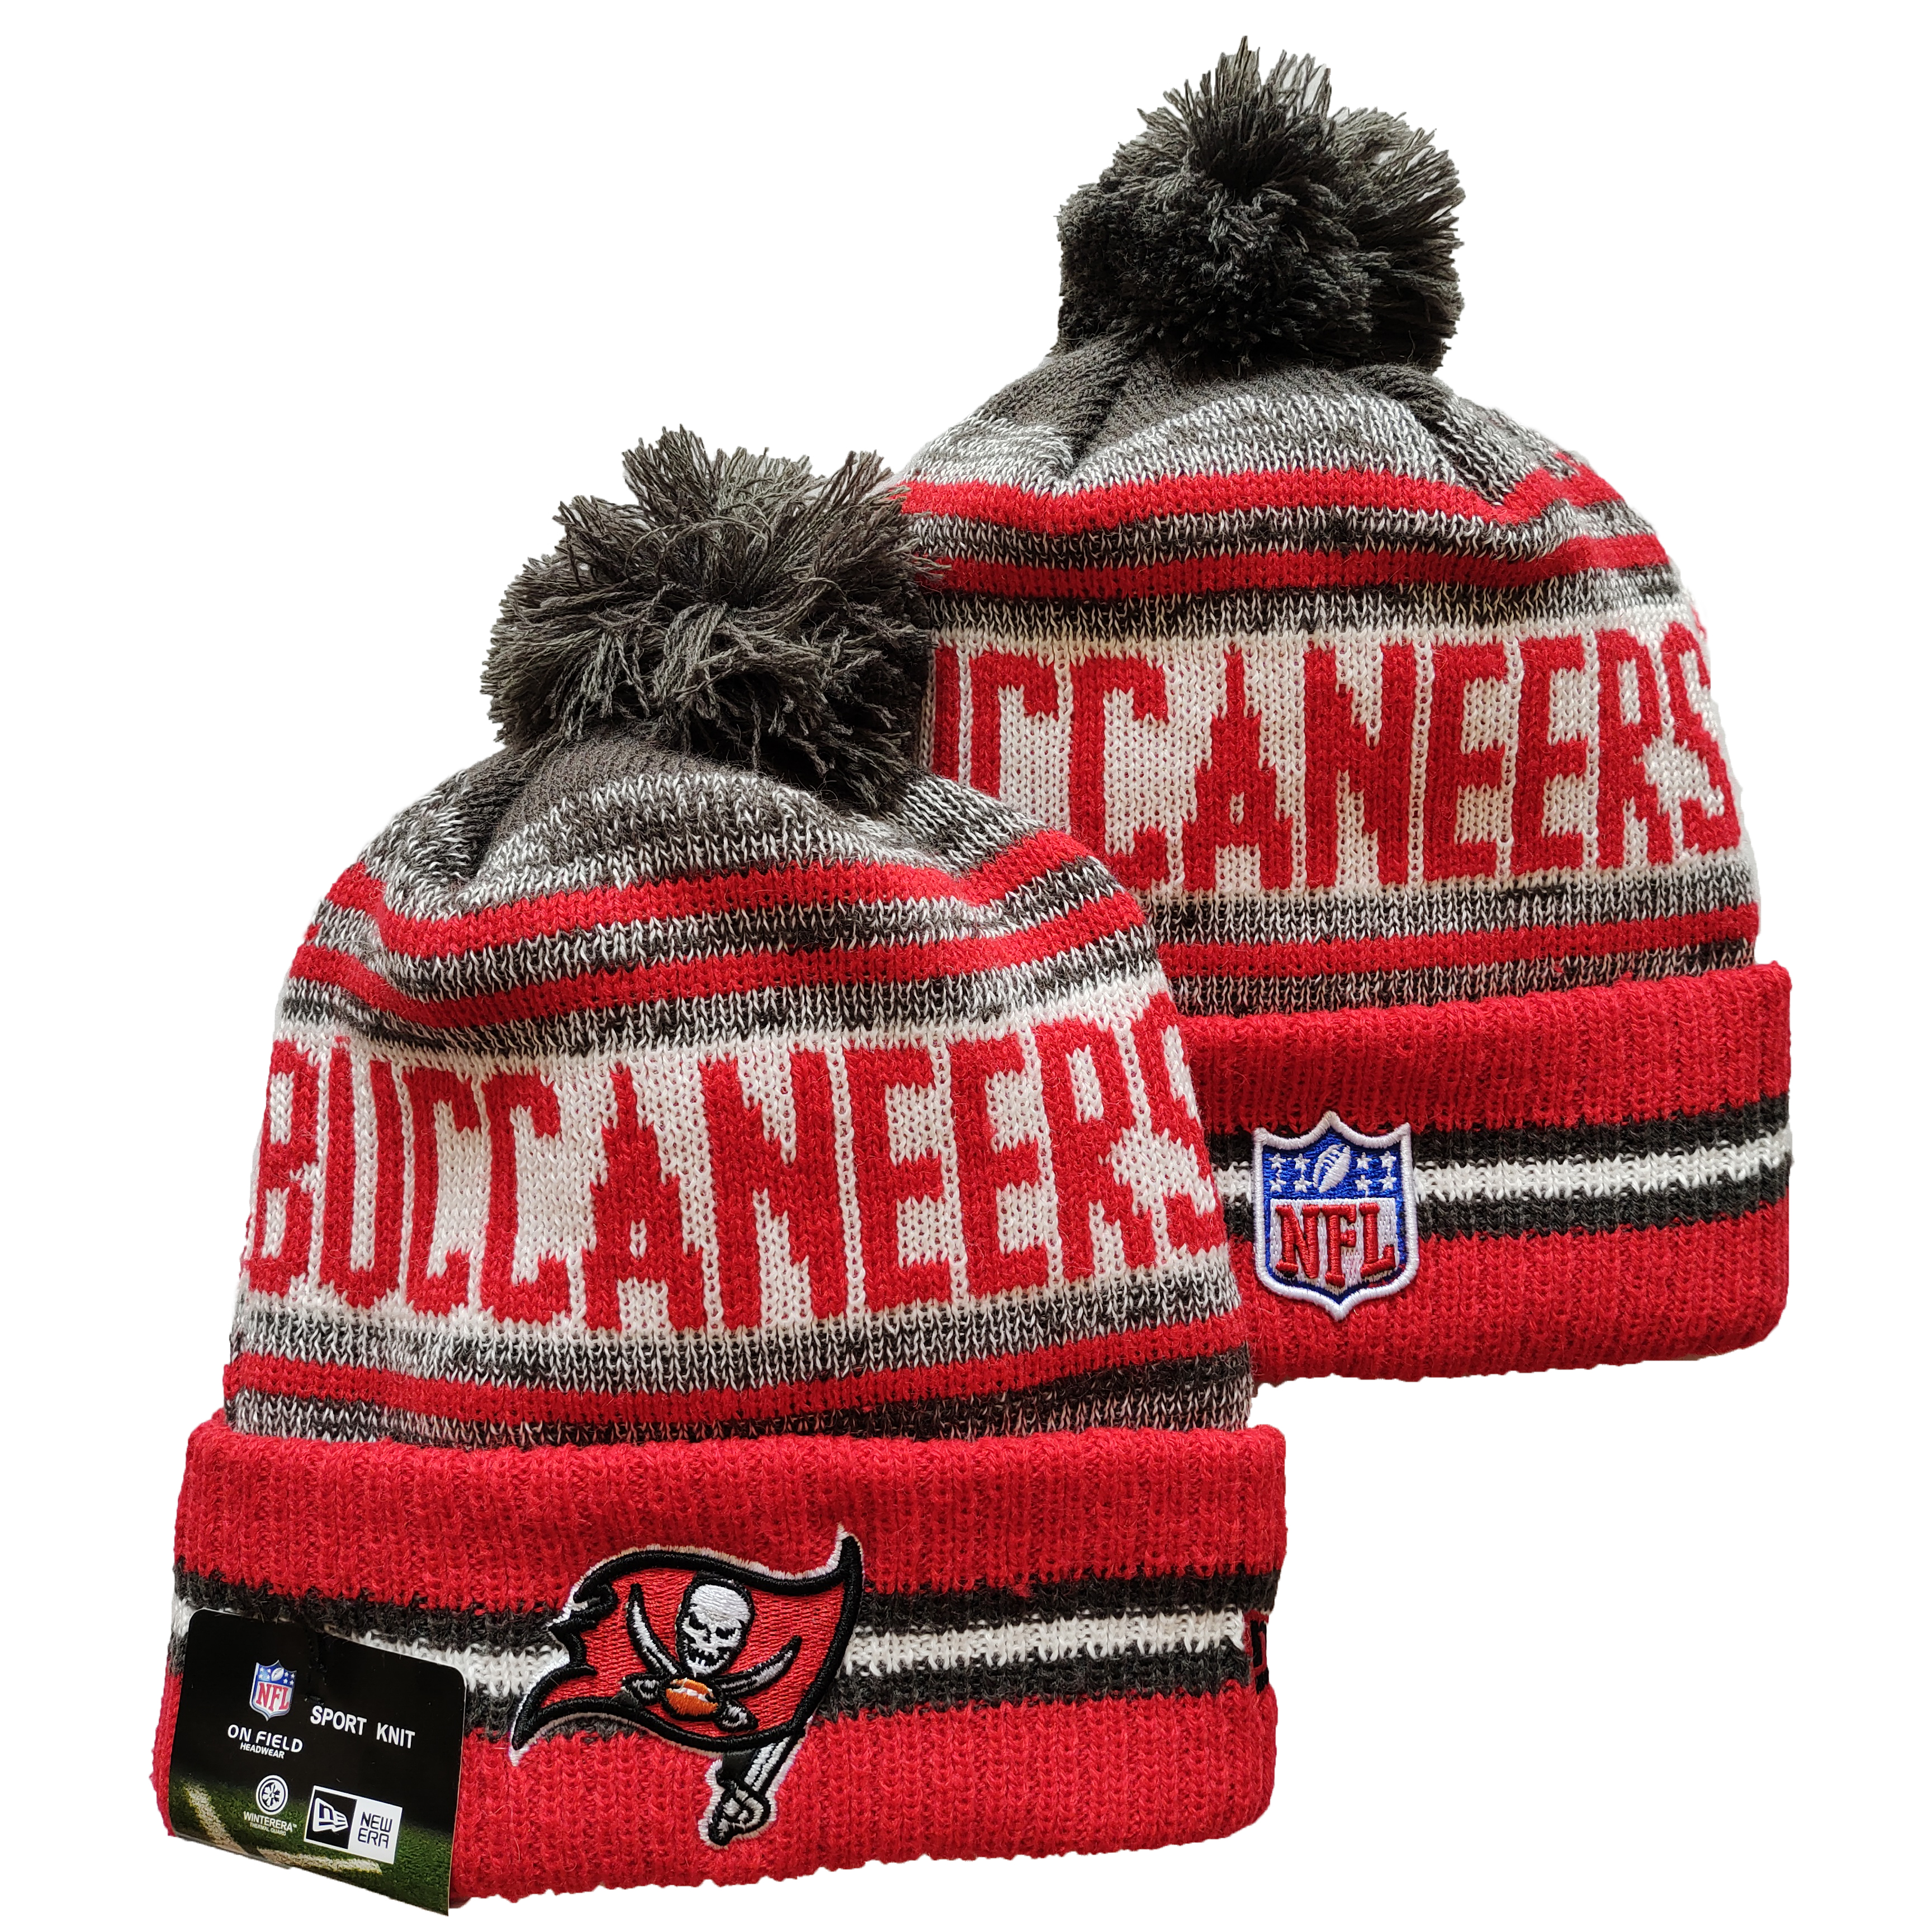 Buccaneers Team Logo Red and Gray Pom Cuffed Knit Hat YD